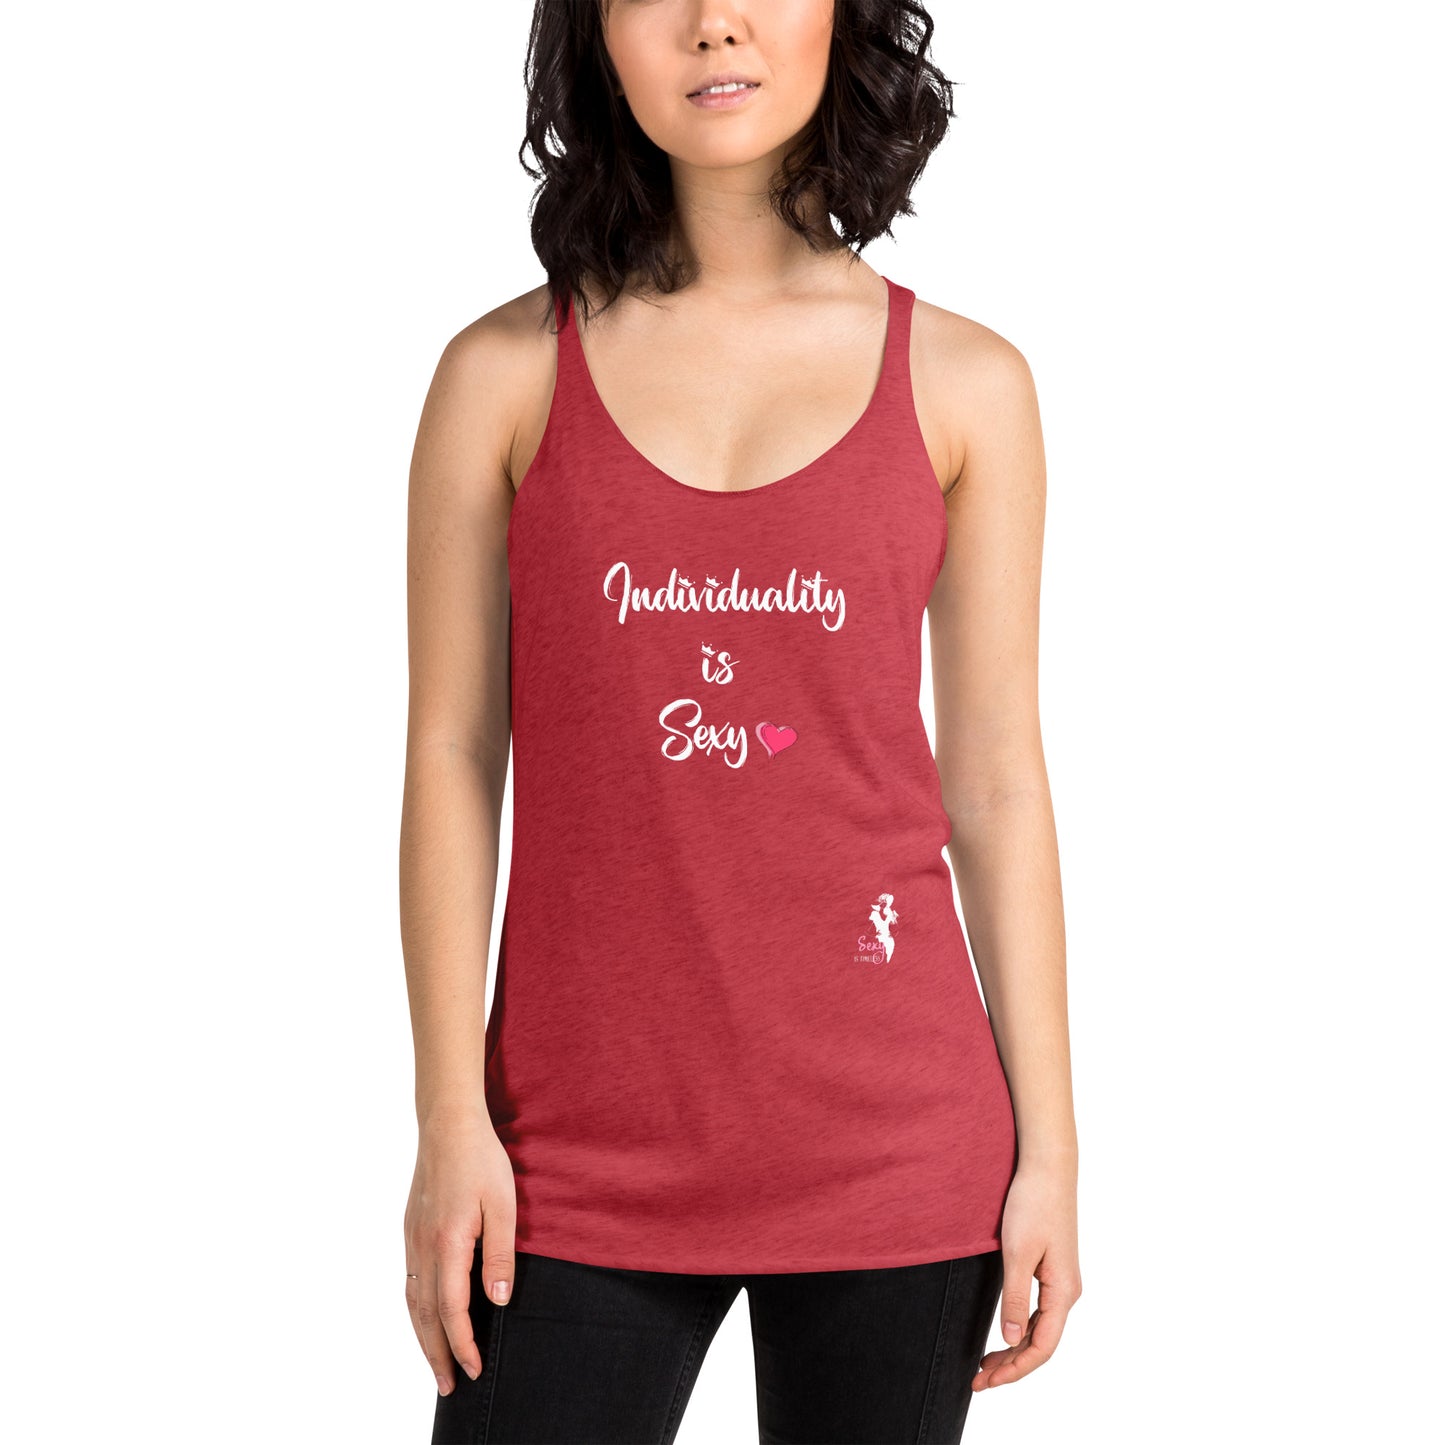 Women's Racerback Tank - Individuality is sexy - colors